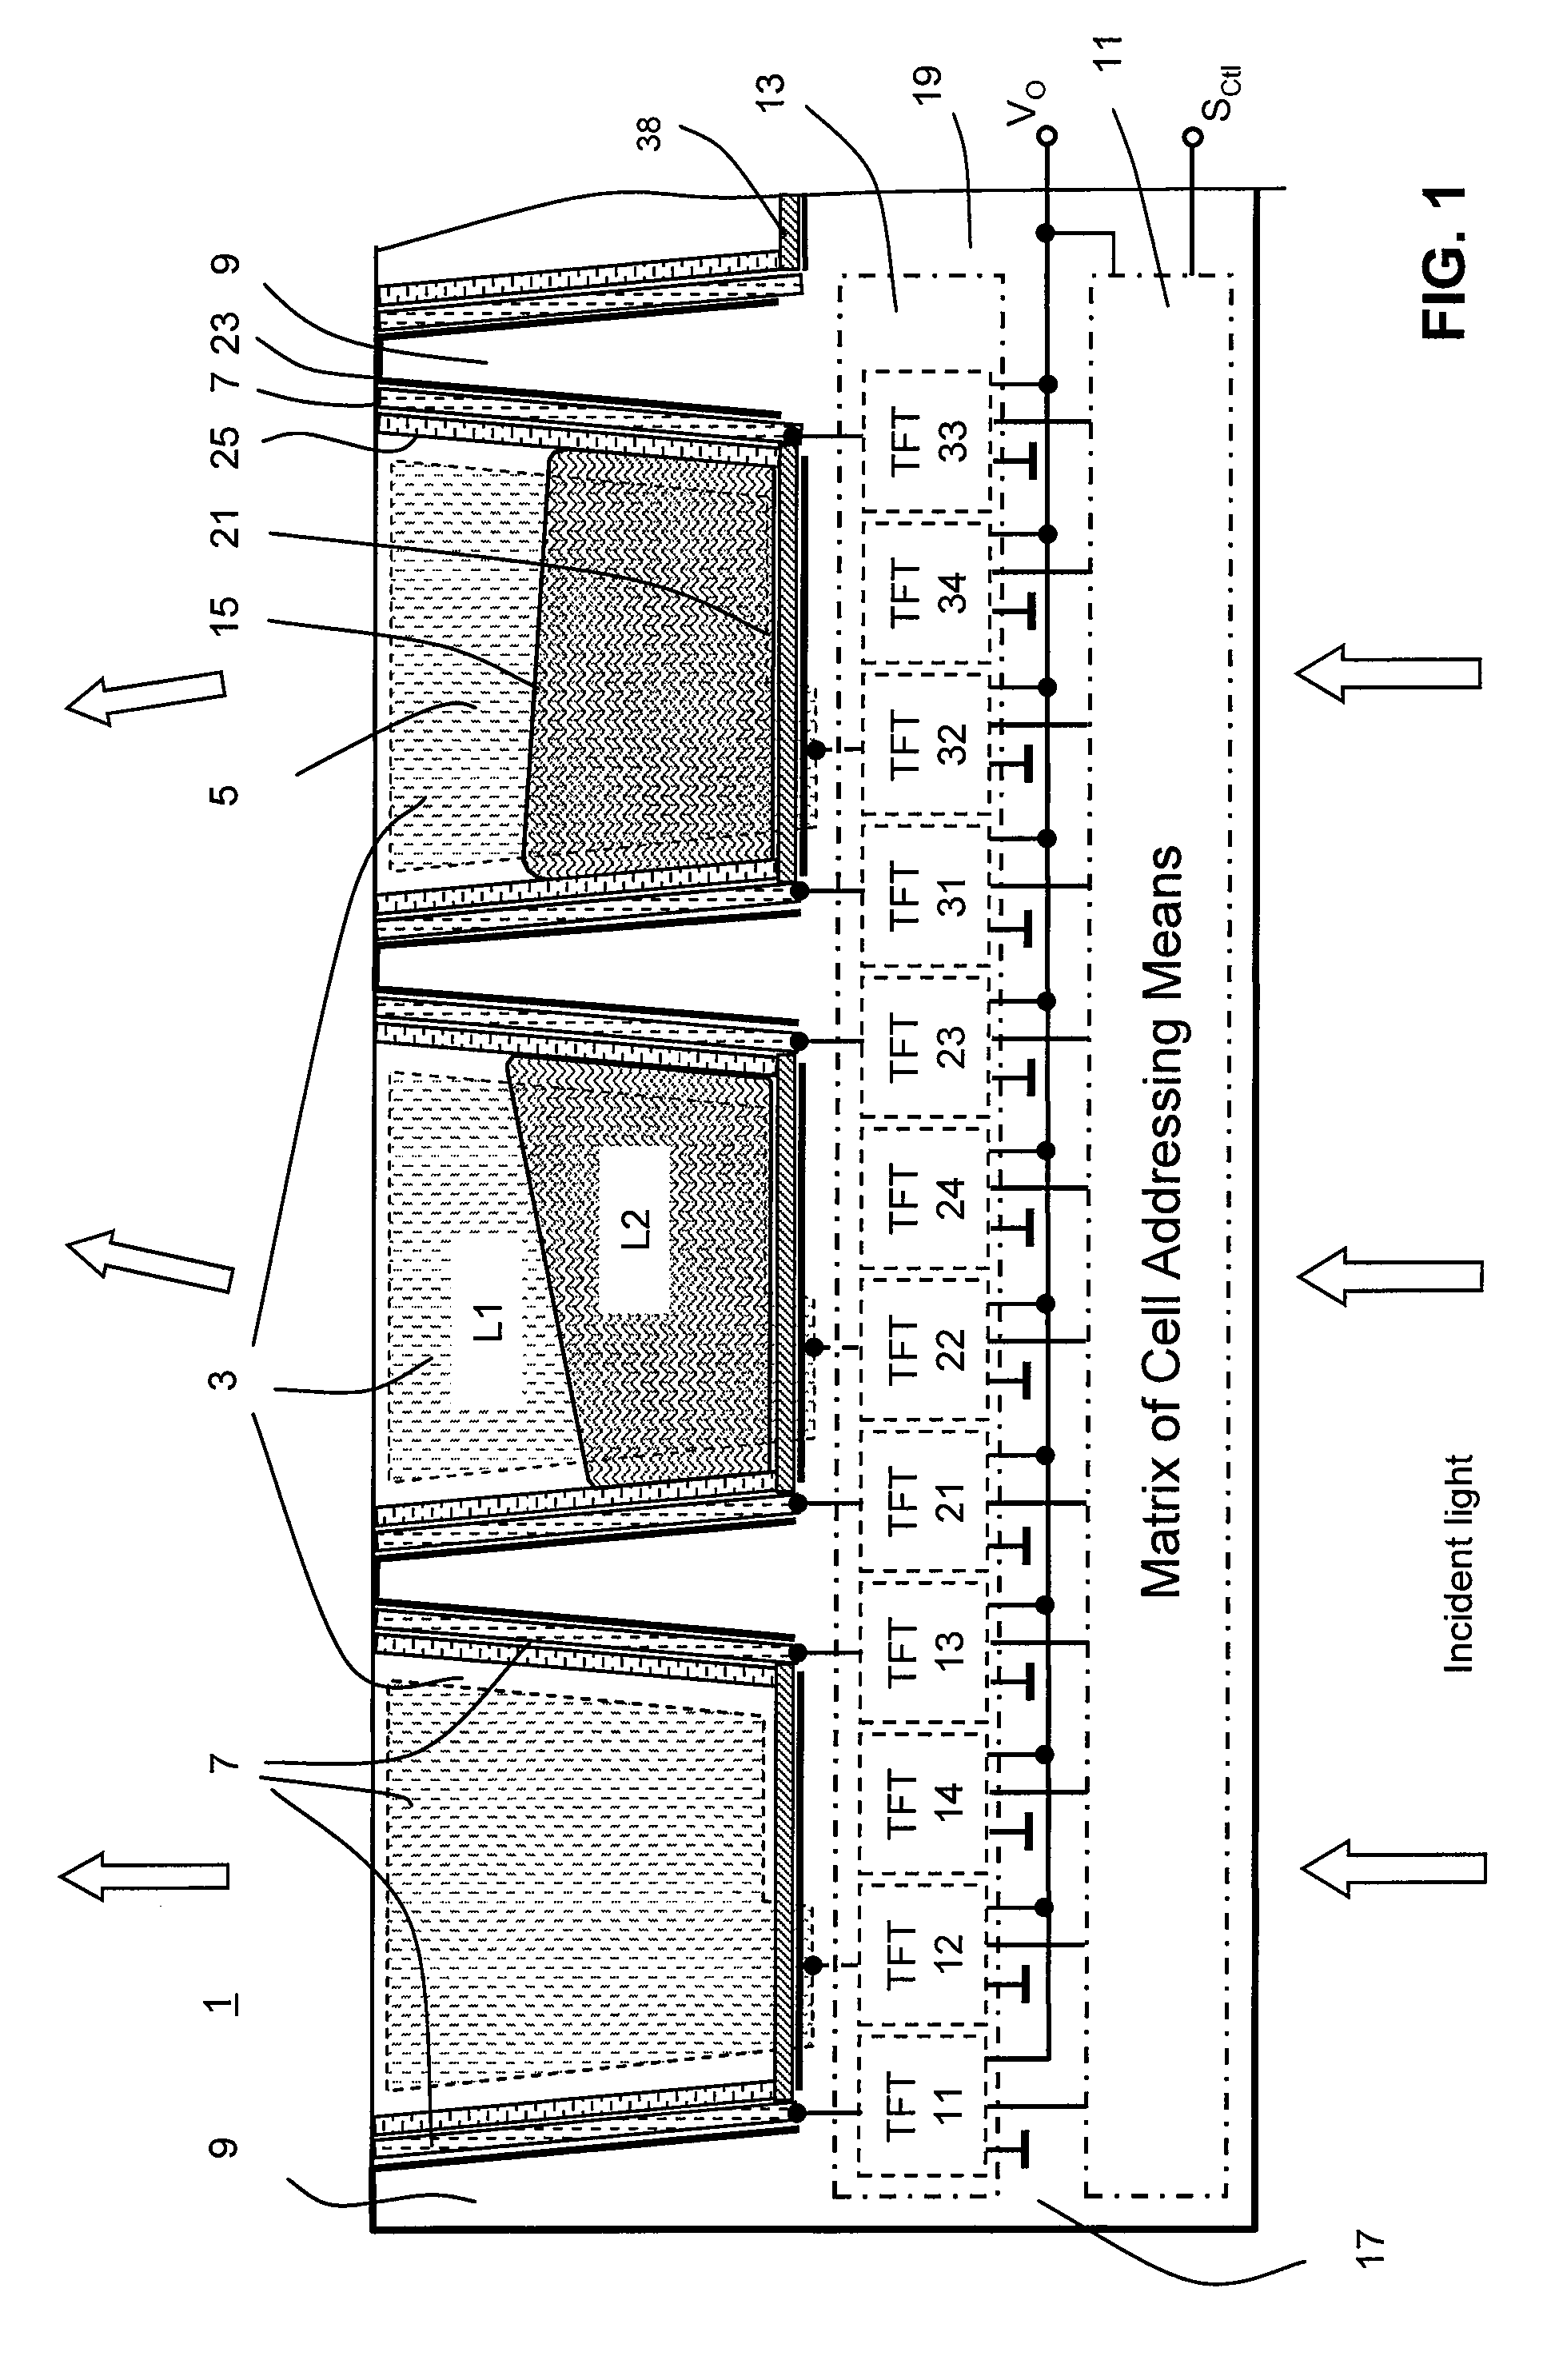 Tunable Optical Array Device Comprising Liquid Cells